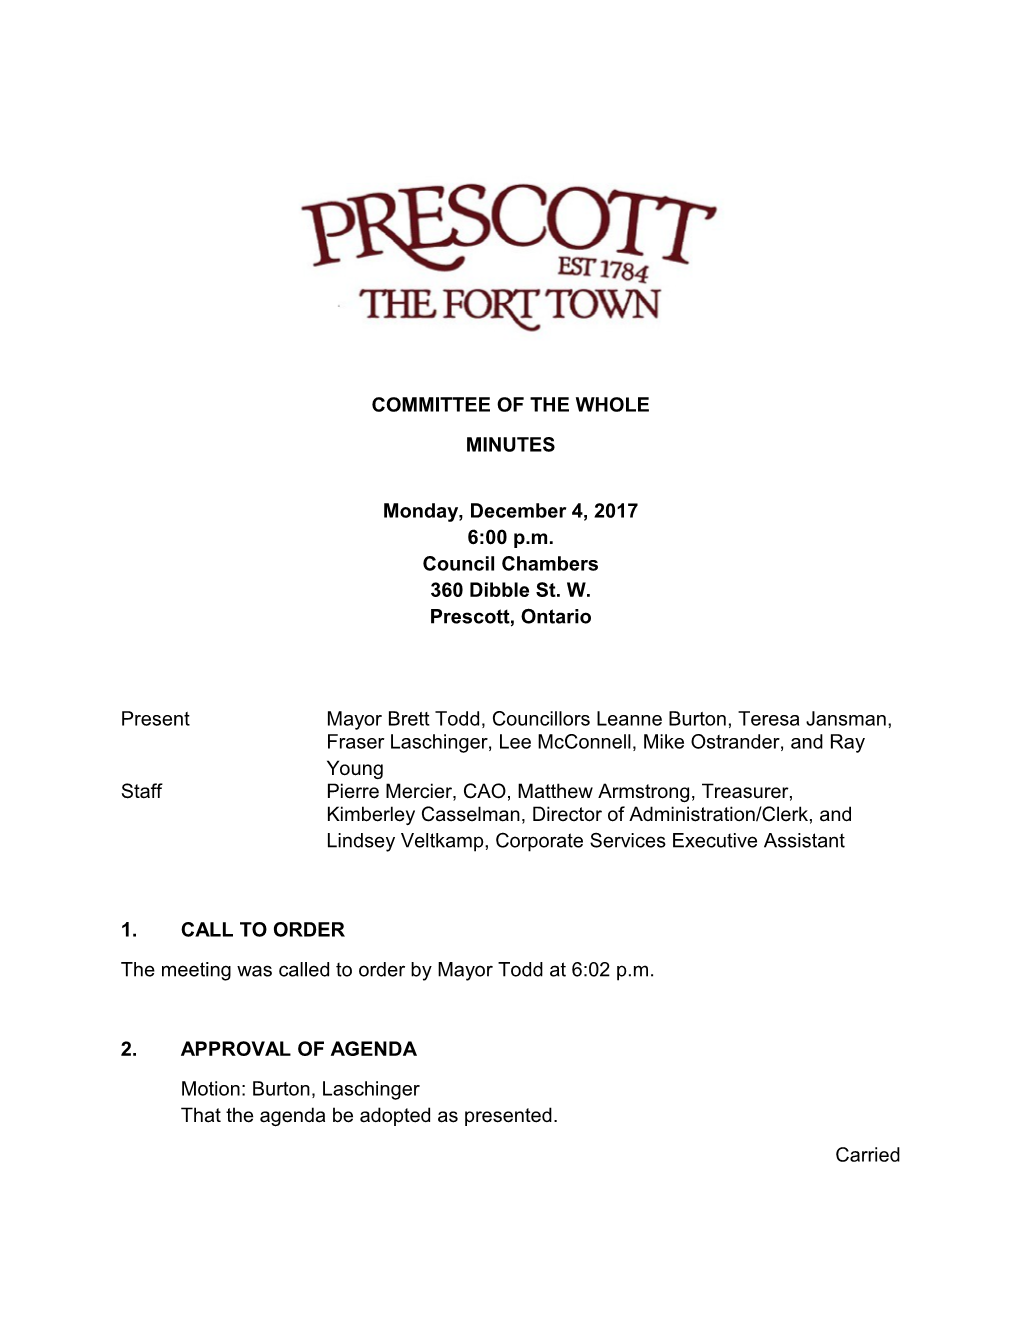 The Meeting Was Called to Order by Mayor Todd at 6:02 P.M